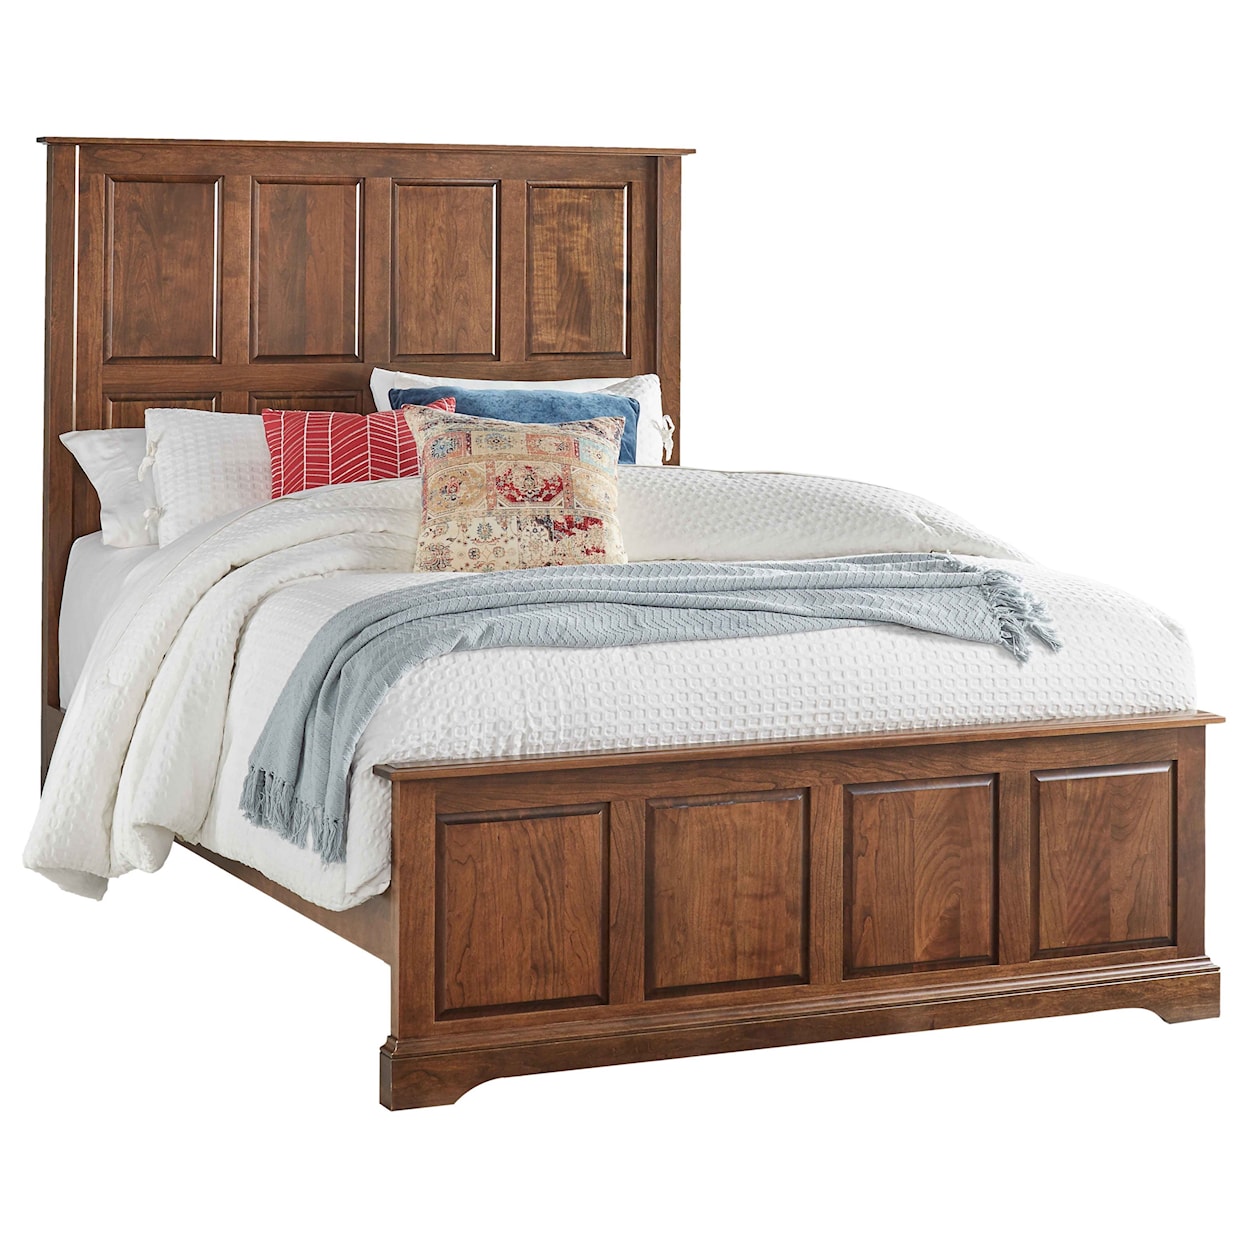 Daniels Amish Carriage Queen-Size Bed